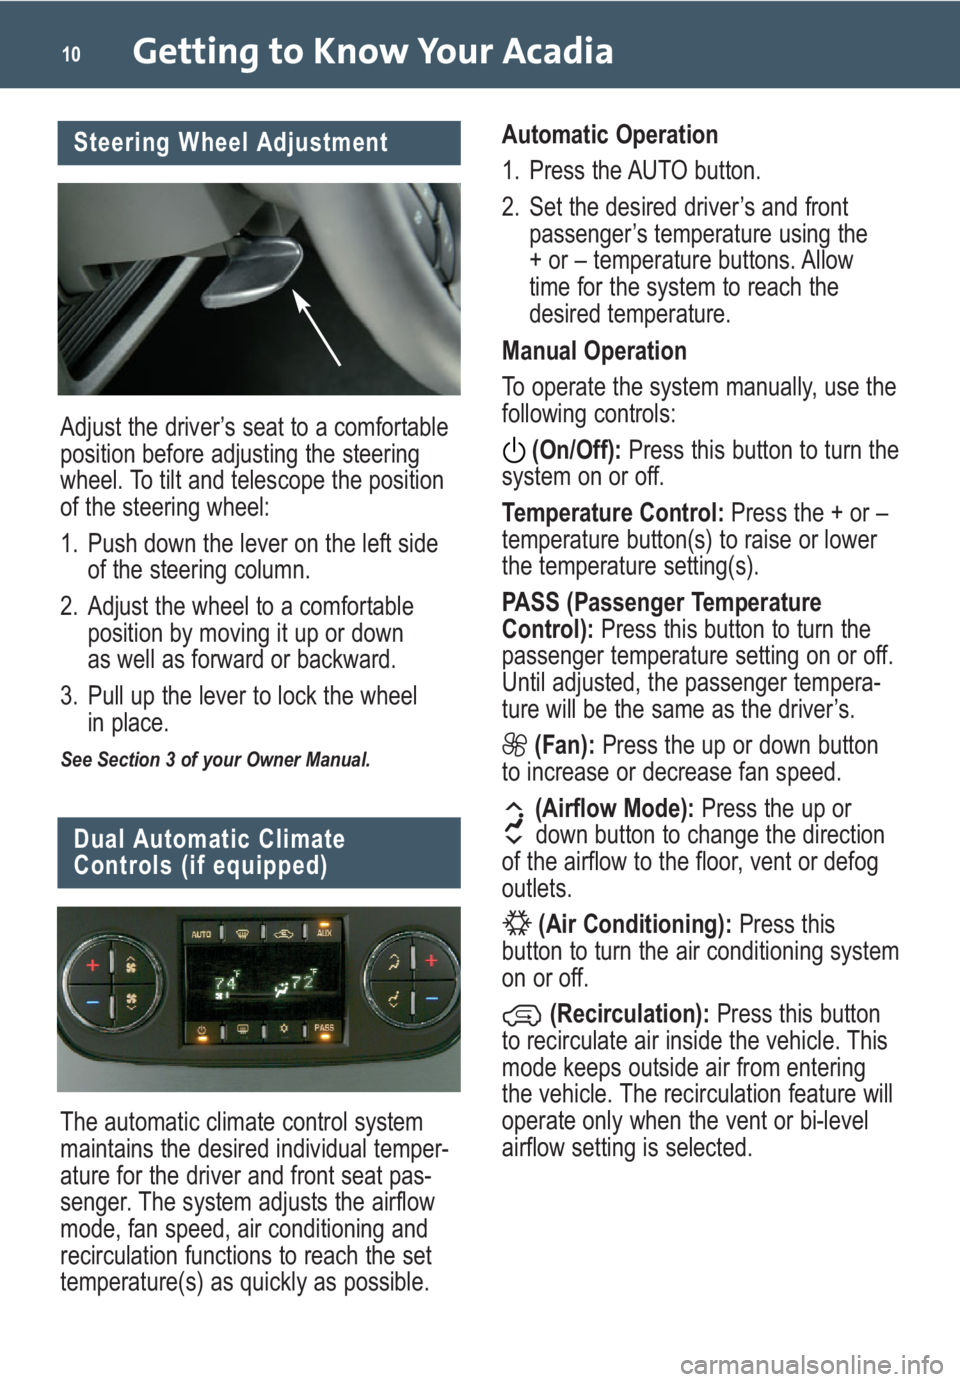 GMC ACADIA 2008  Get To Know Guide Getting to Know Your Acadia10
Dual Automatic Climate 
Controls (if equipped)
The automatic climate control system
maintains the desired individual temper-
ature for the driver and front seat pas-
seng